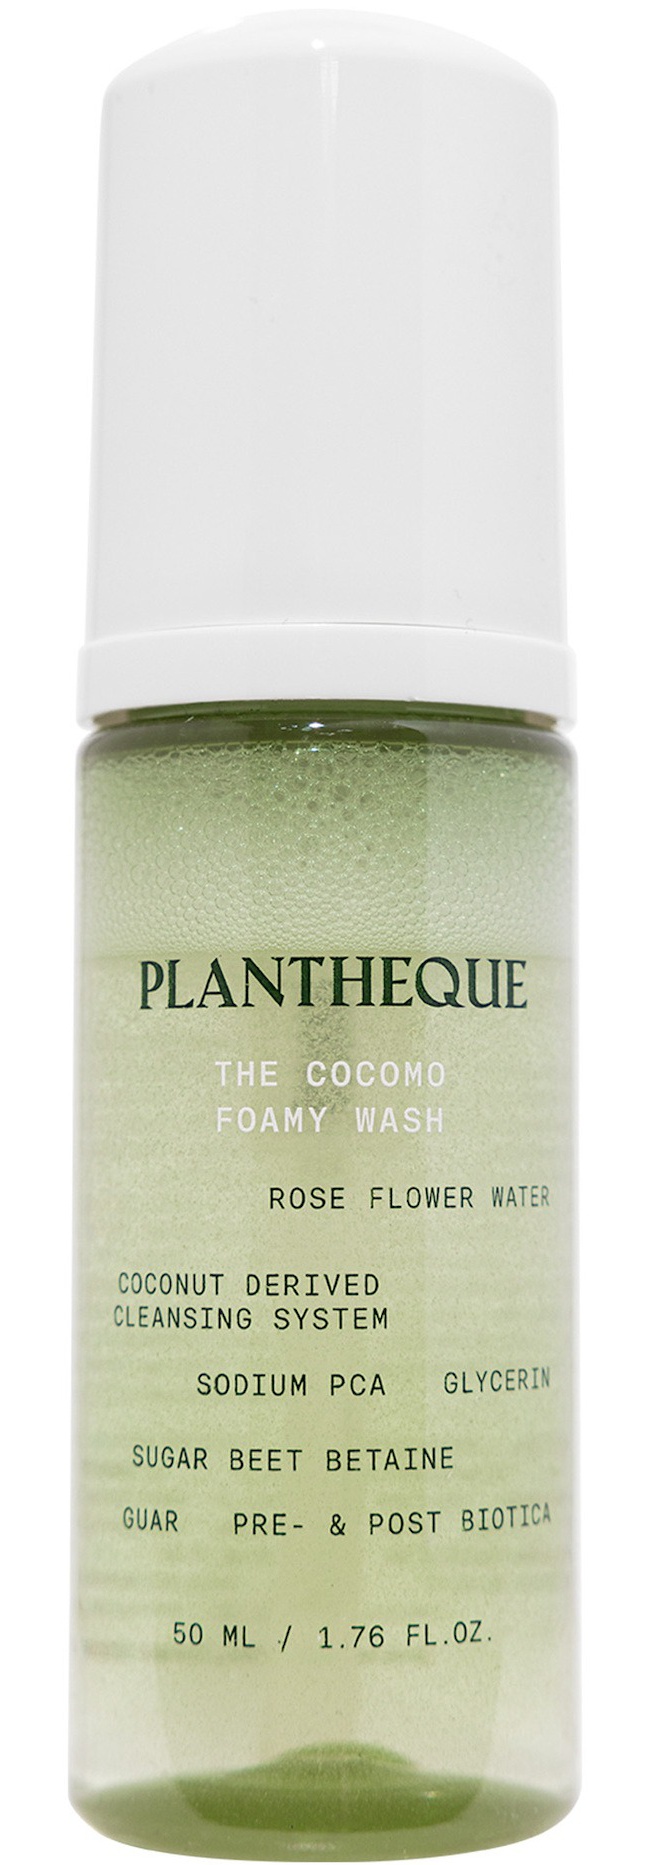 Plantheque The Cocomo Foamy Wash